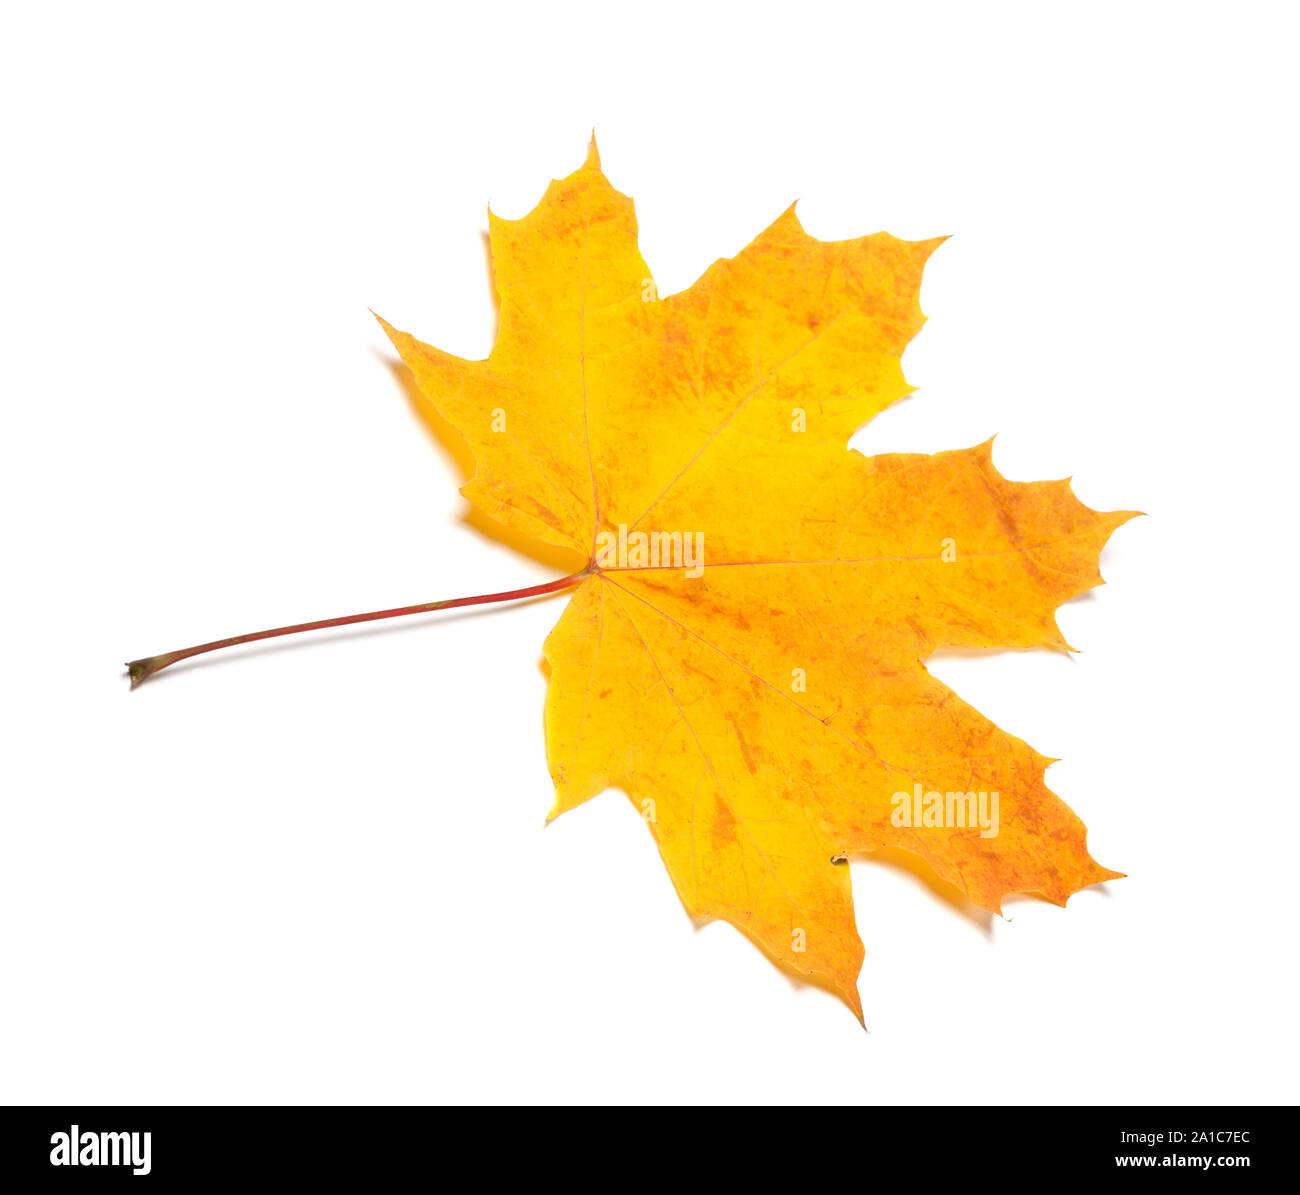 Yellow dried autumn maple-leaf. Isolated on white background. Stock Photo